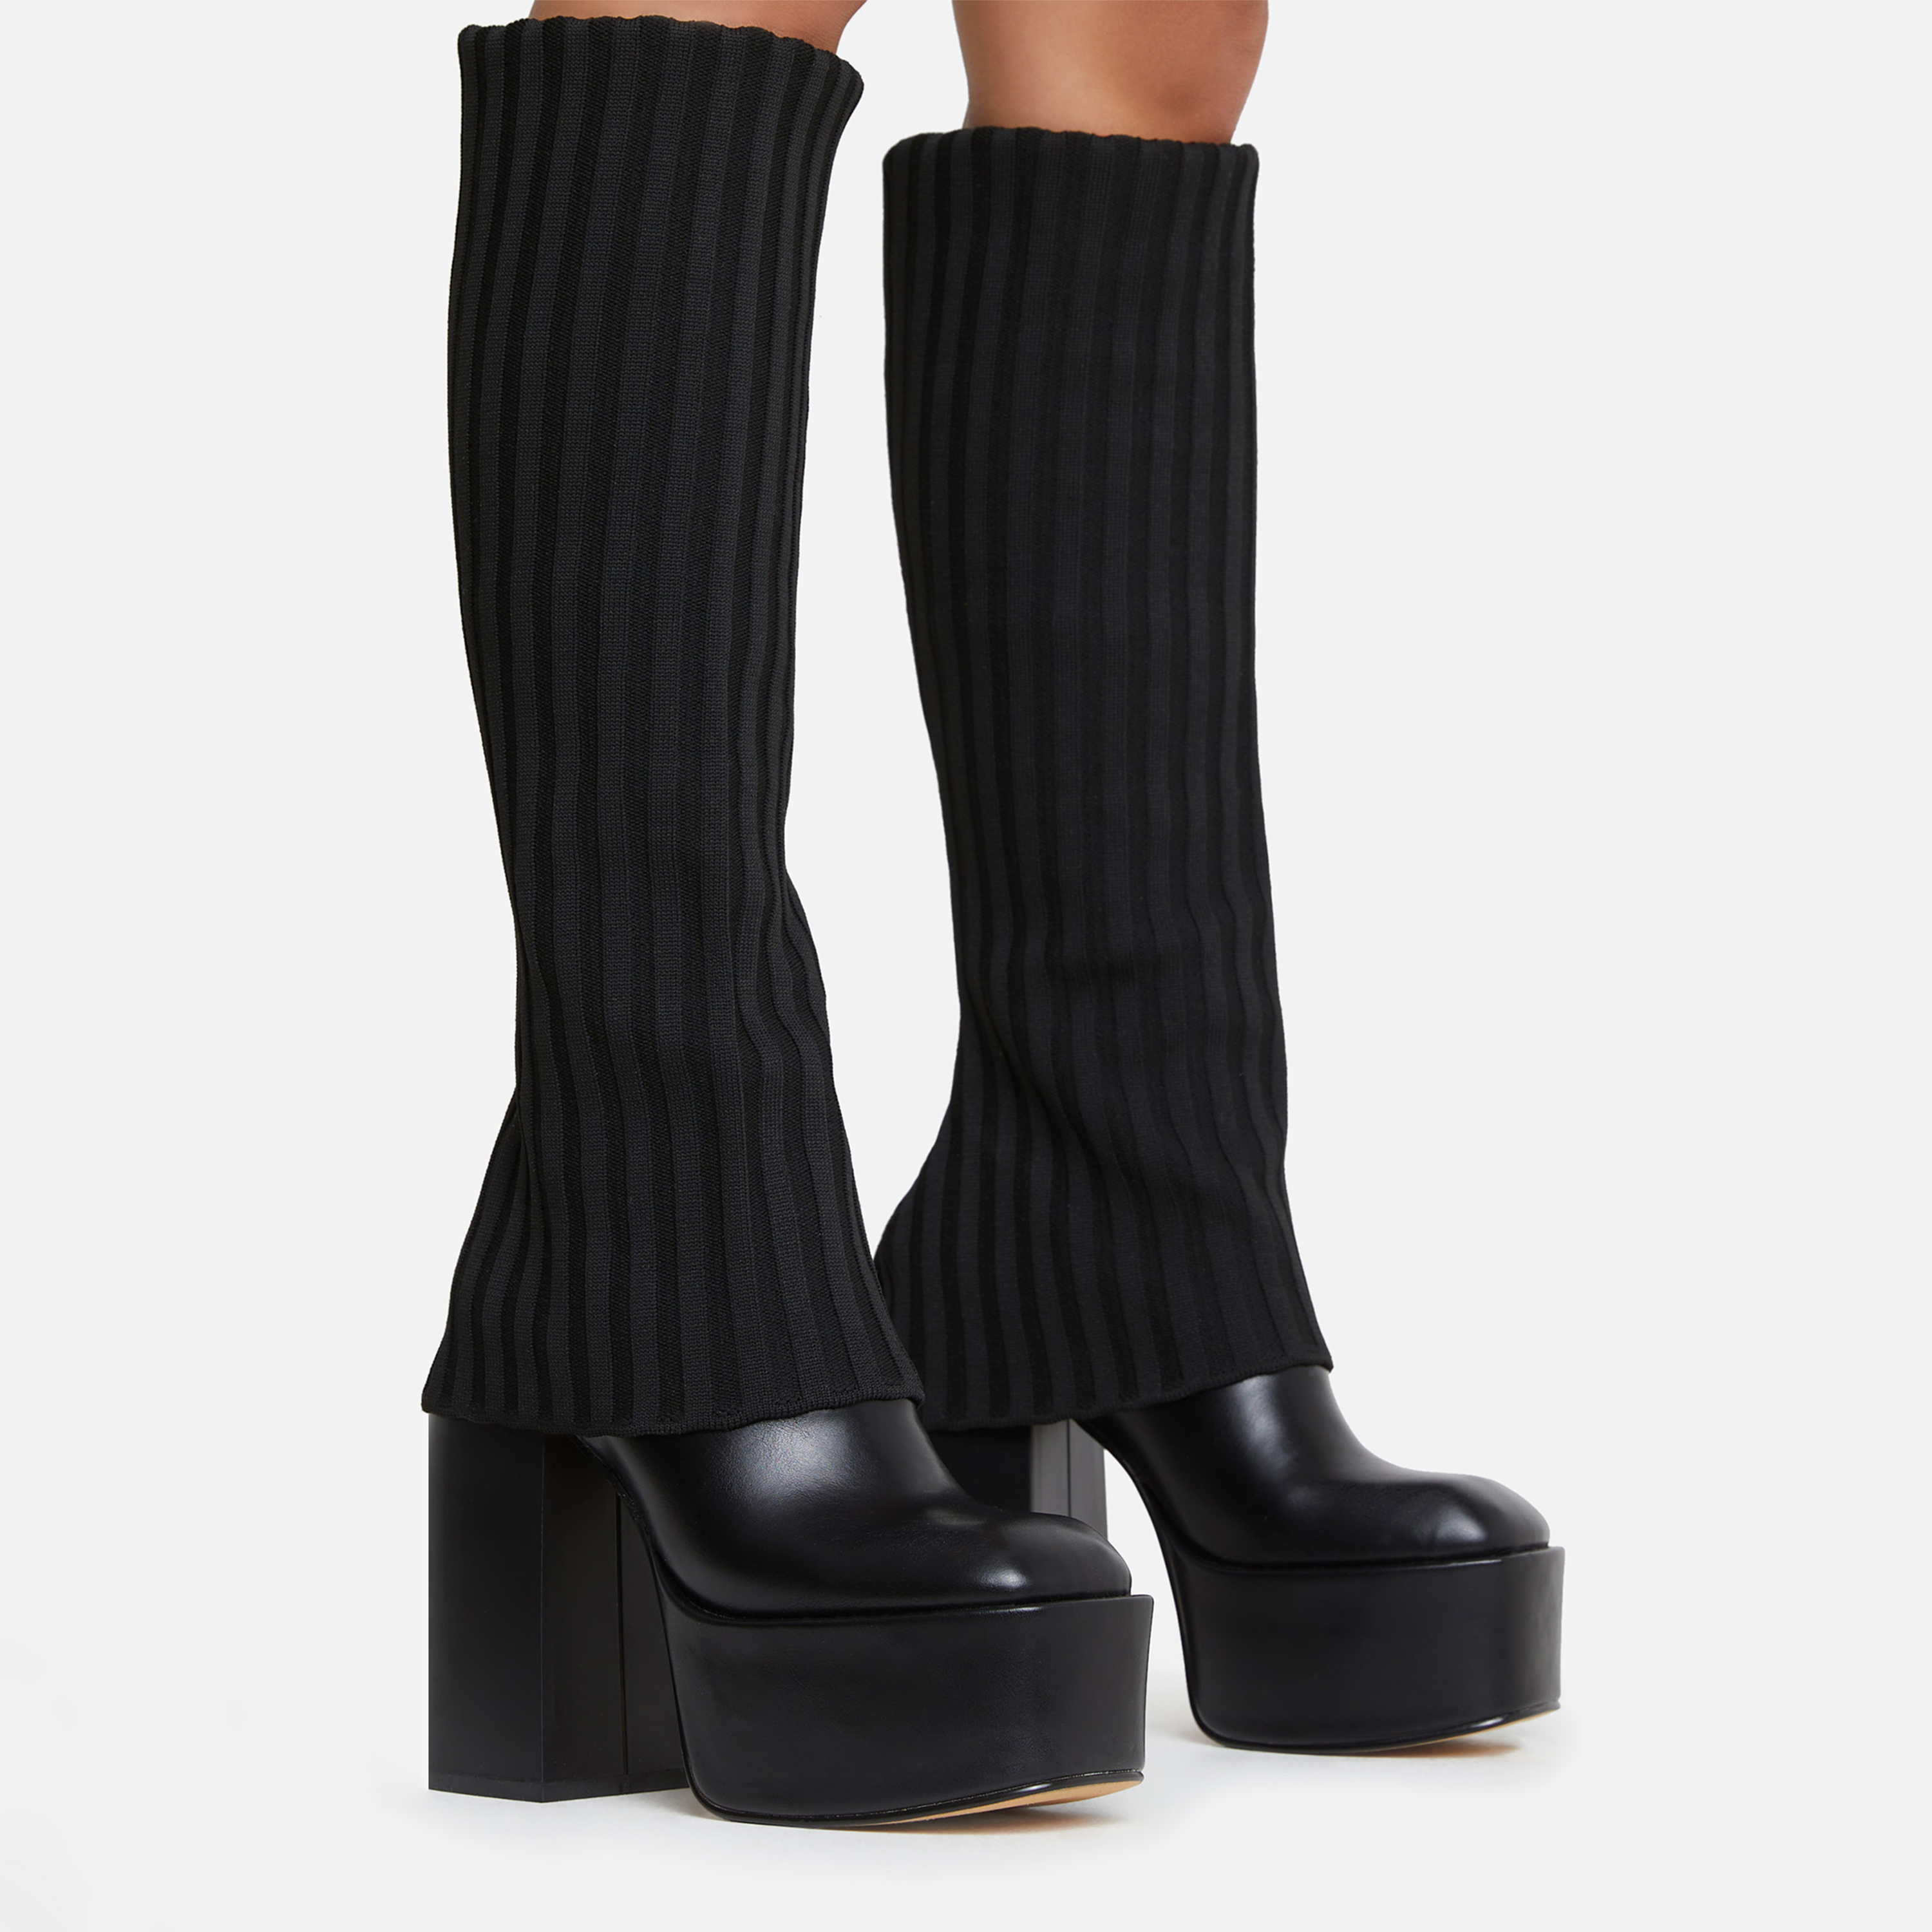 Leila Layered Knit Detail Square Toe Platform Block Heel Calf Boot In Black  Faux Leather